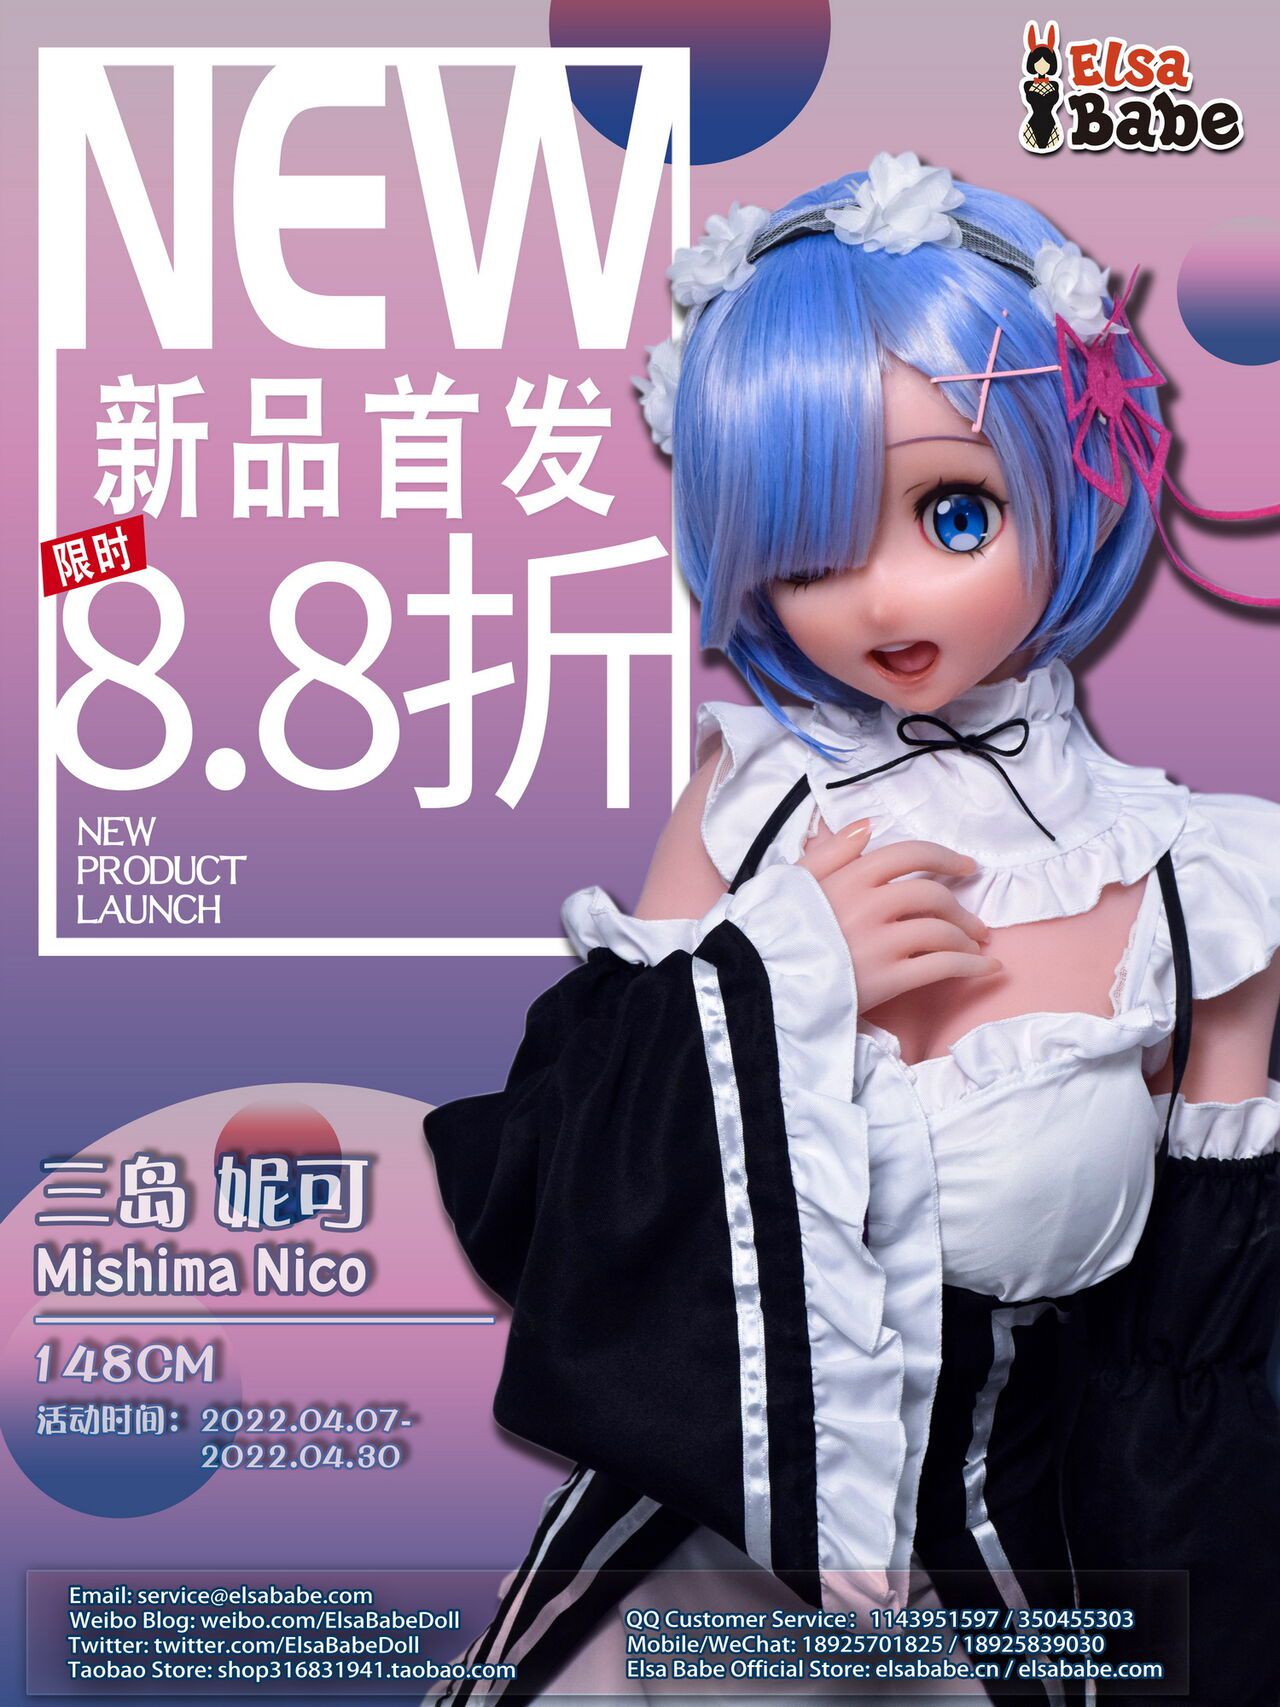 Elsa Babe [148CM AHR005 Mishima Nico] 12% off the first launch of new doll! 2022.04.07 1